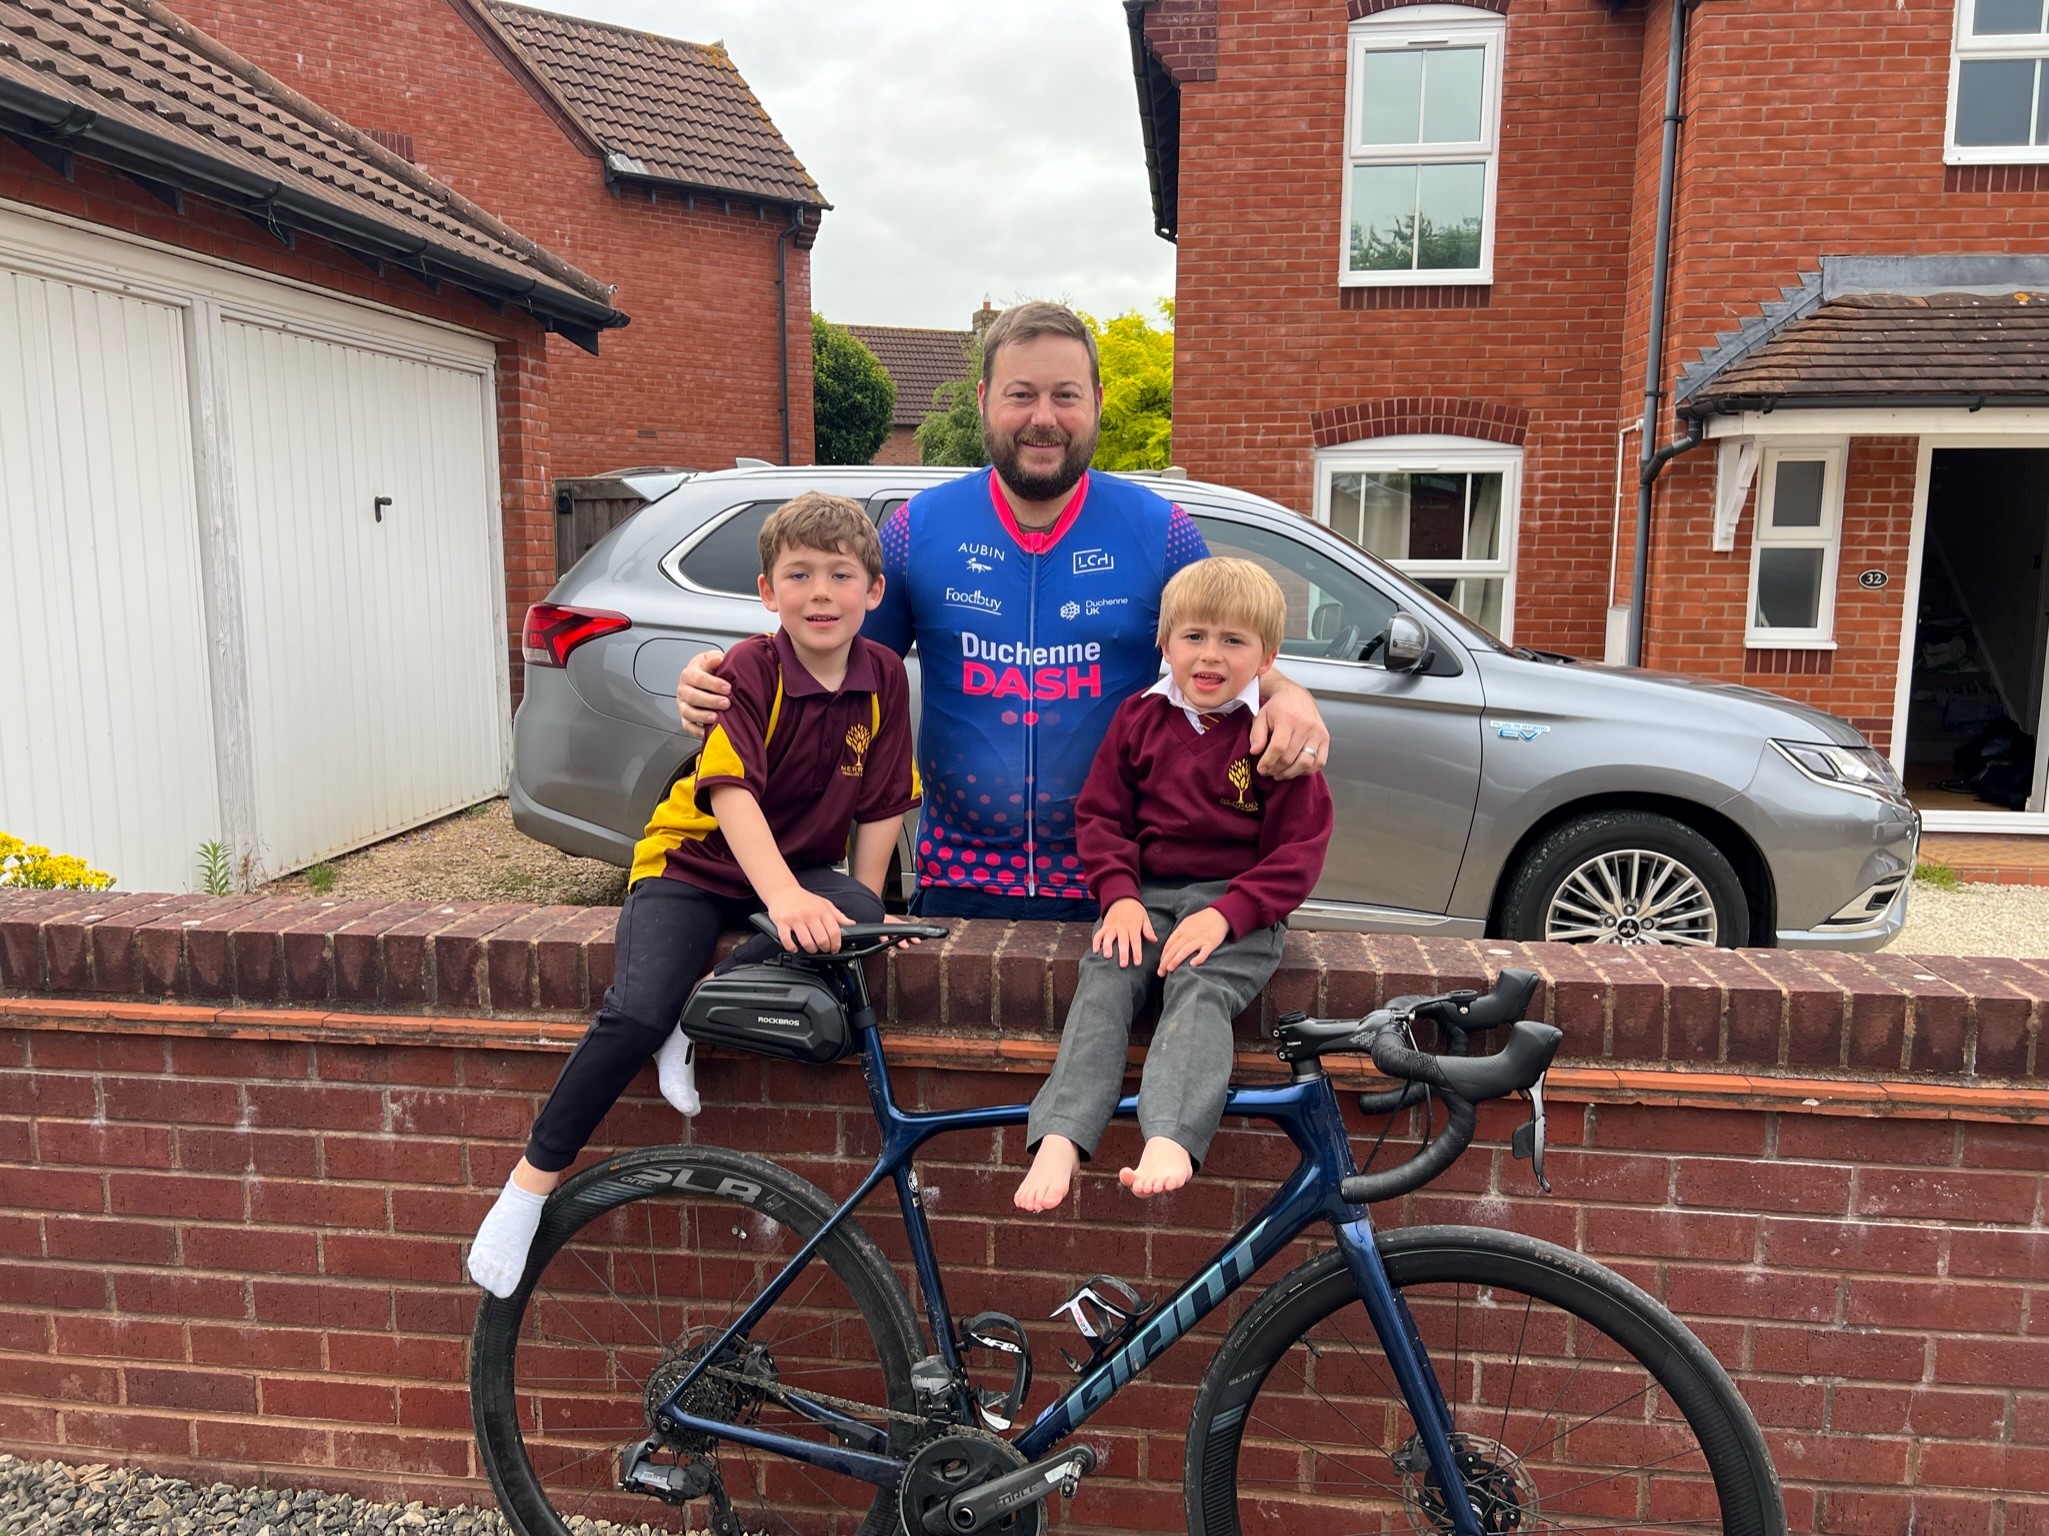 Ross Bennett with his sons, preparing for the Duchenne Dash 2022